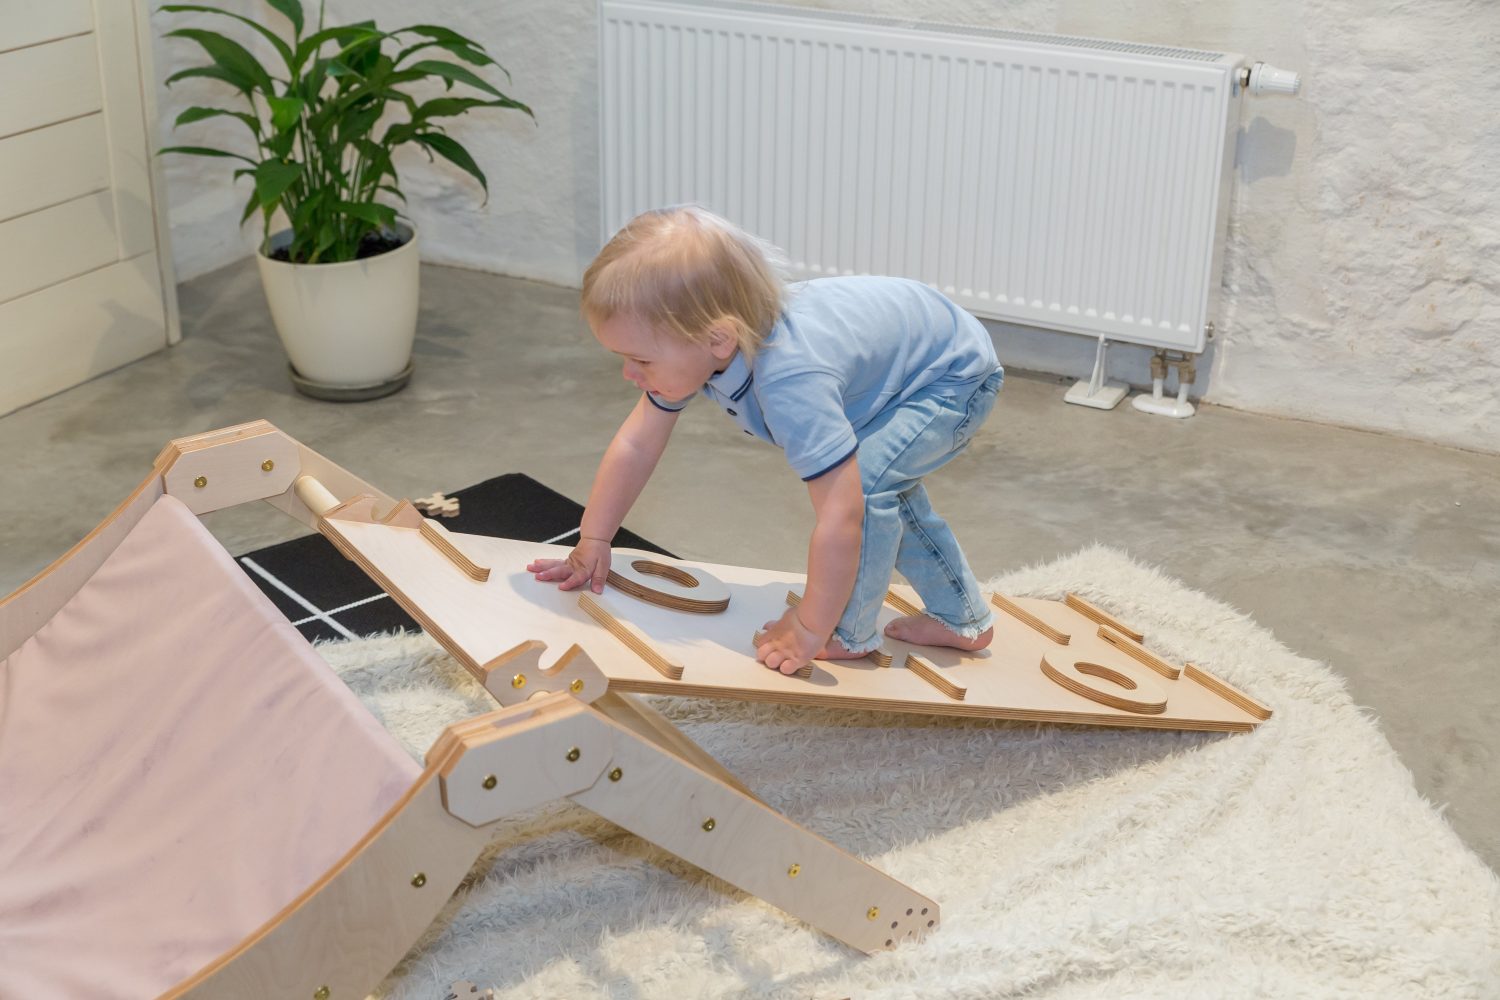 Toddlers Climbing Furniture by Luula